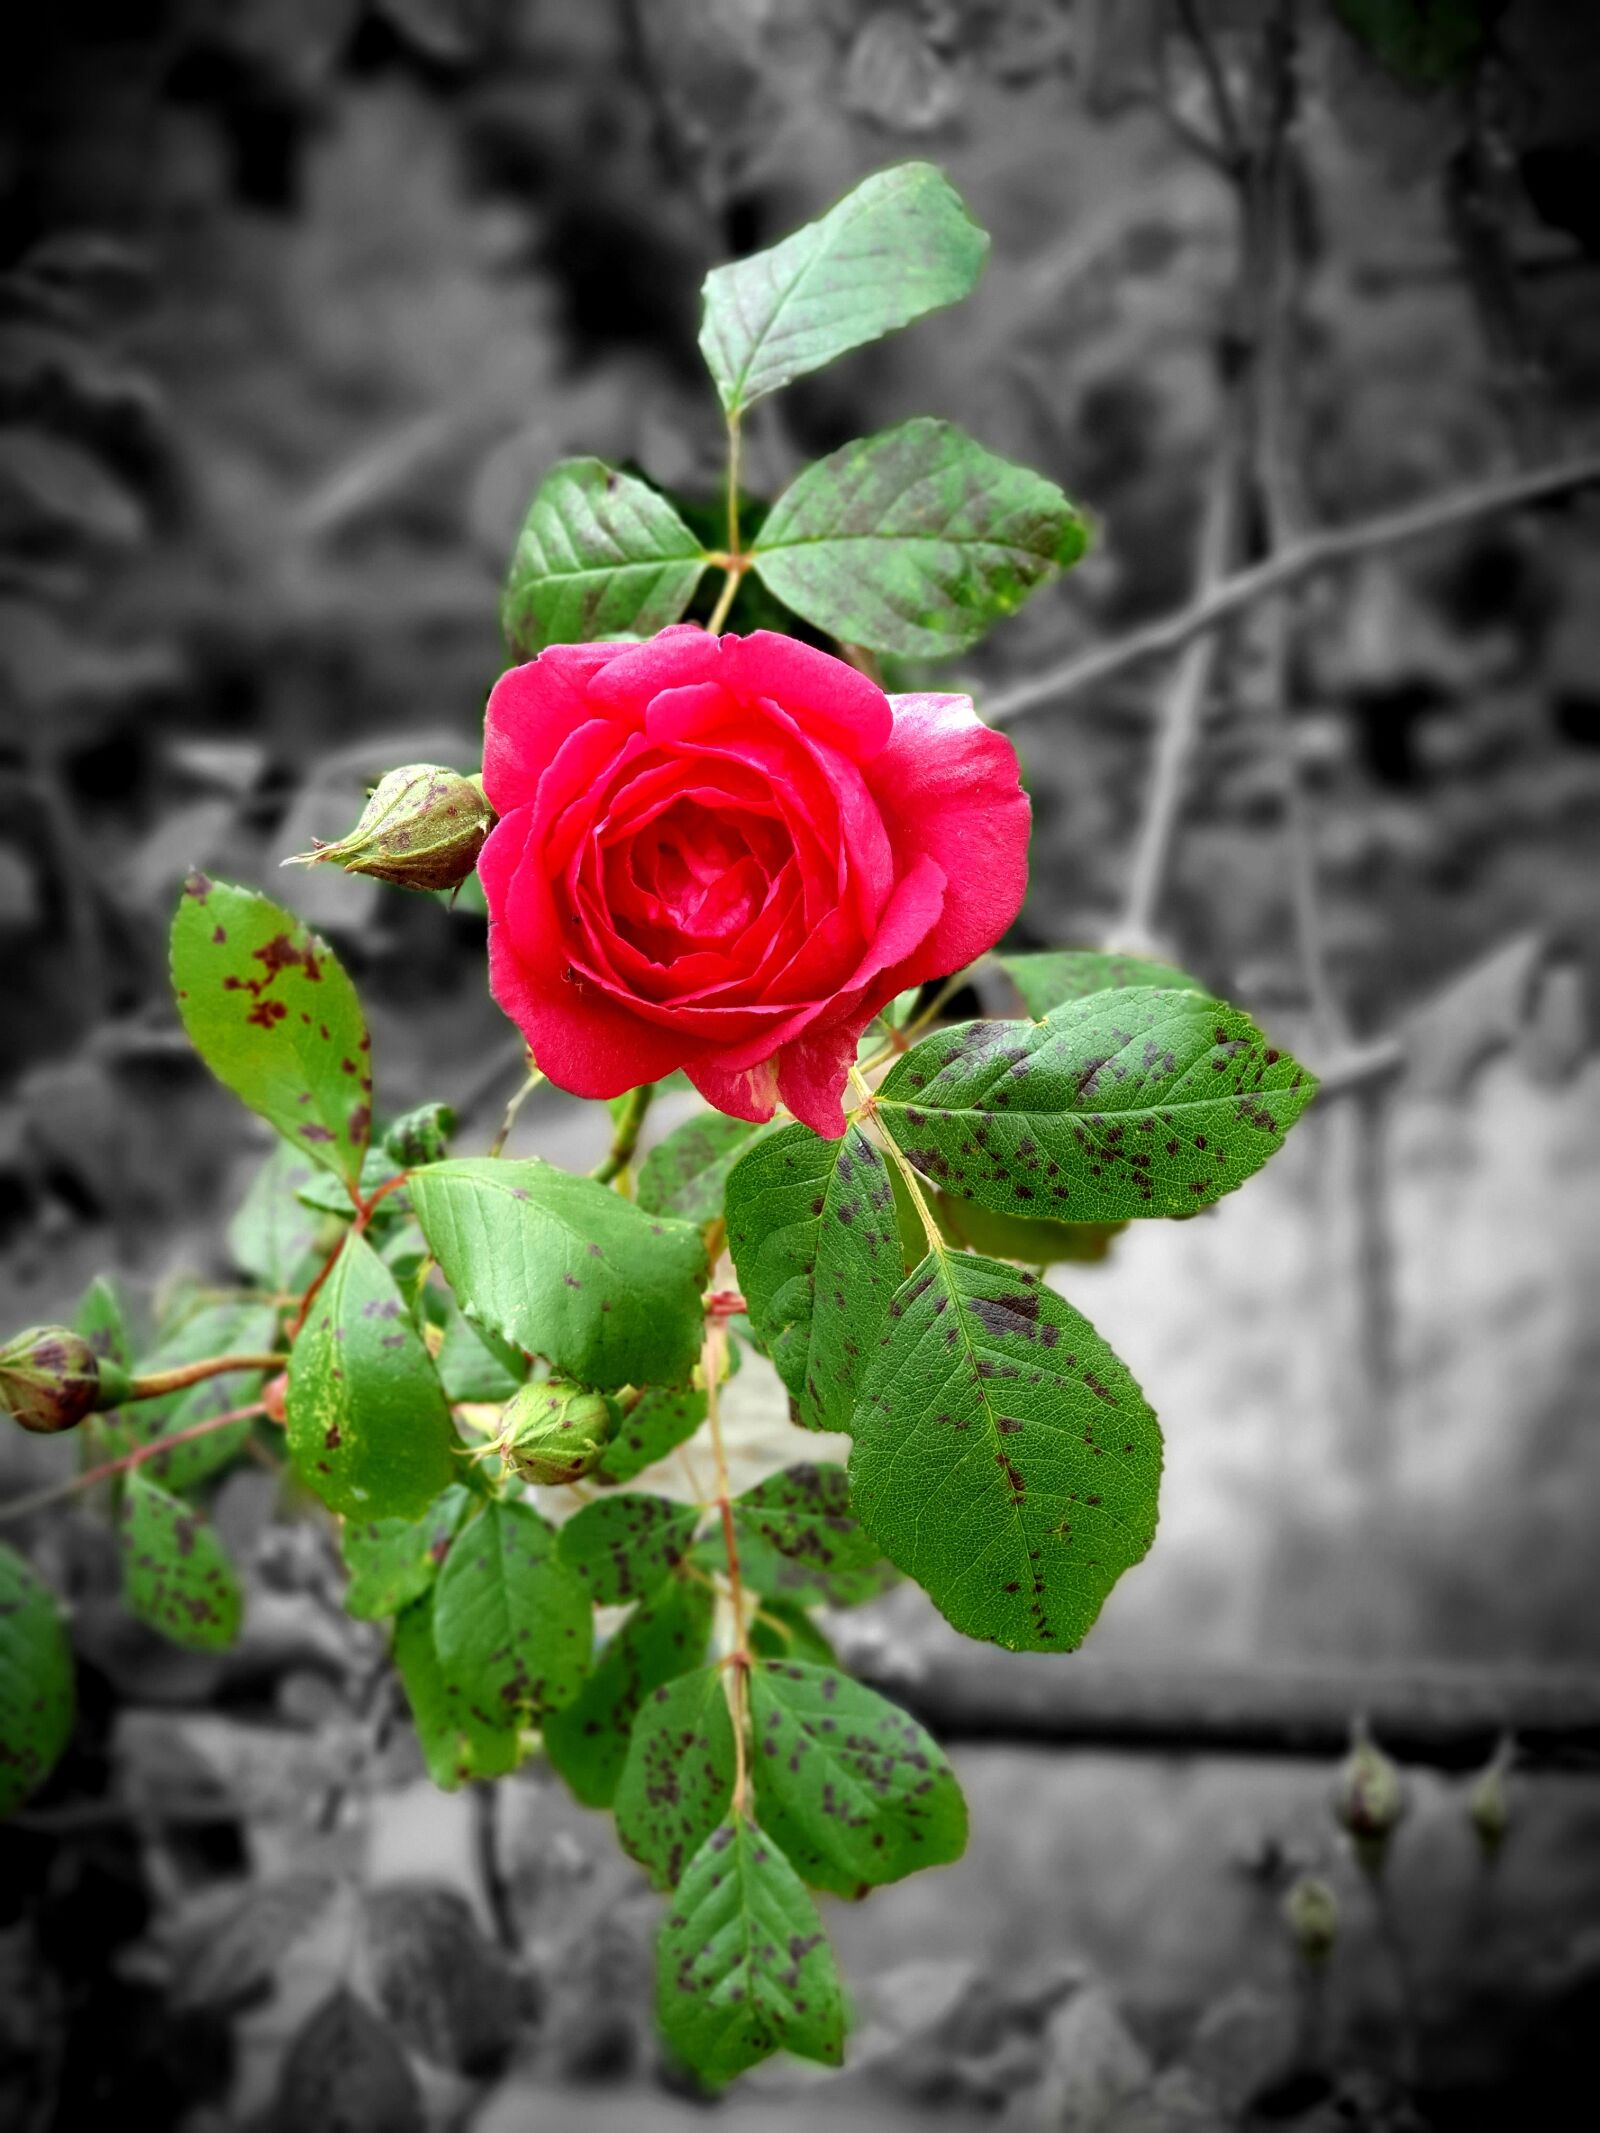 Samsung Galaxy S10+ sample photo. Flower, rose, red photography